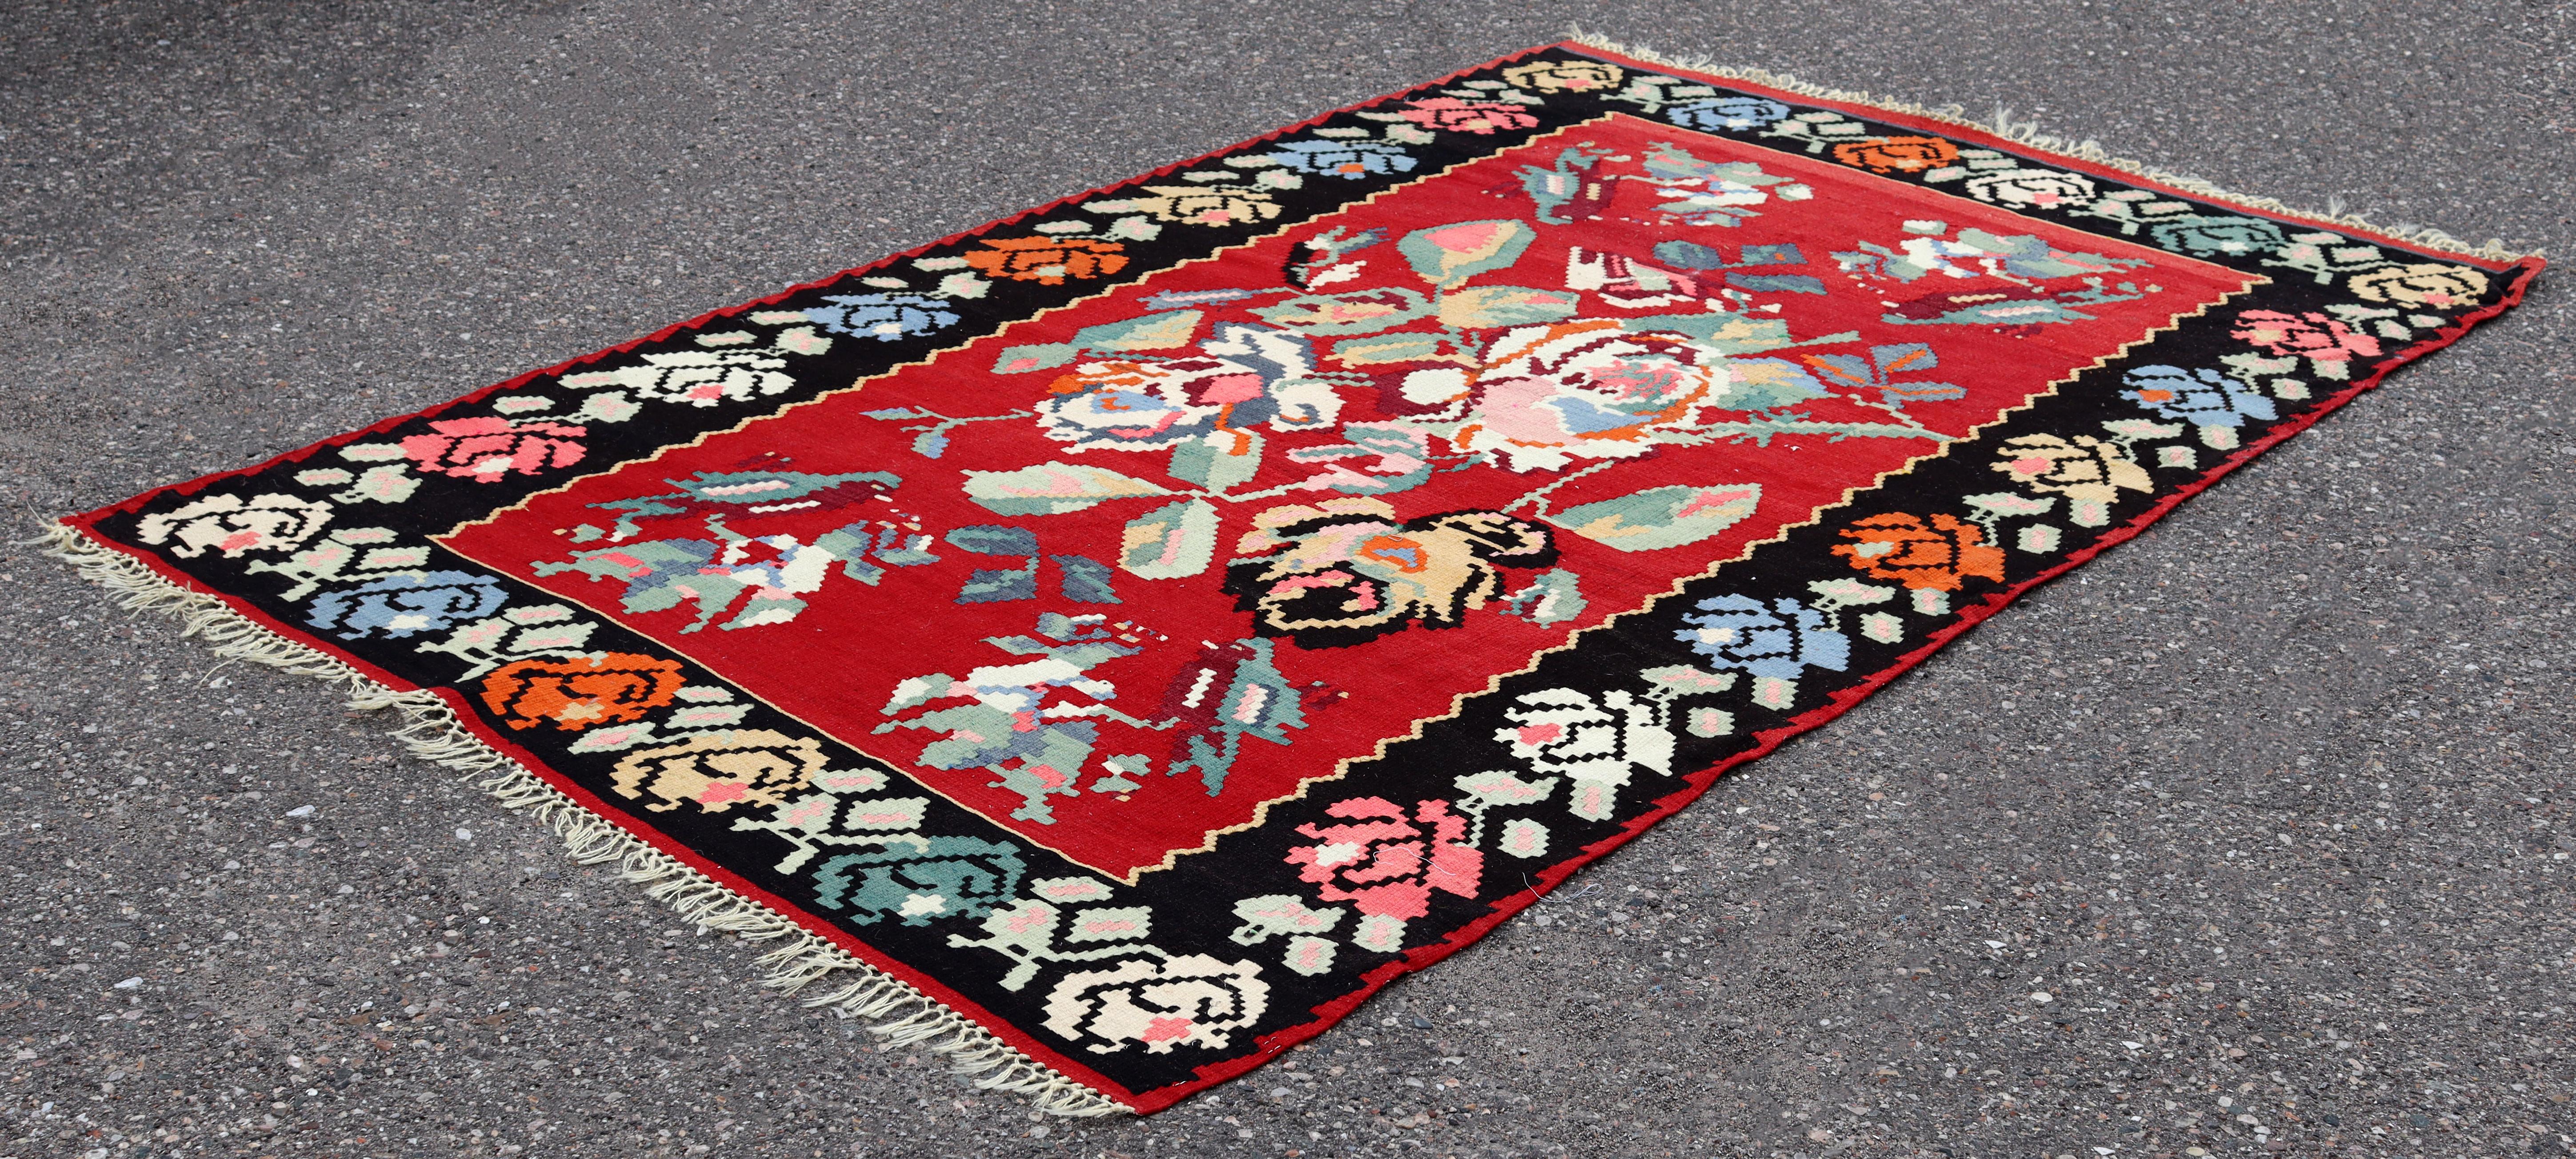 Mid-Century Modern Mid Century Modern Kilim Wool Area Rug Red Hand Made in Turkey Floral Pattern For Sale